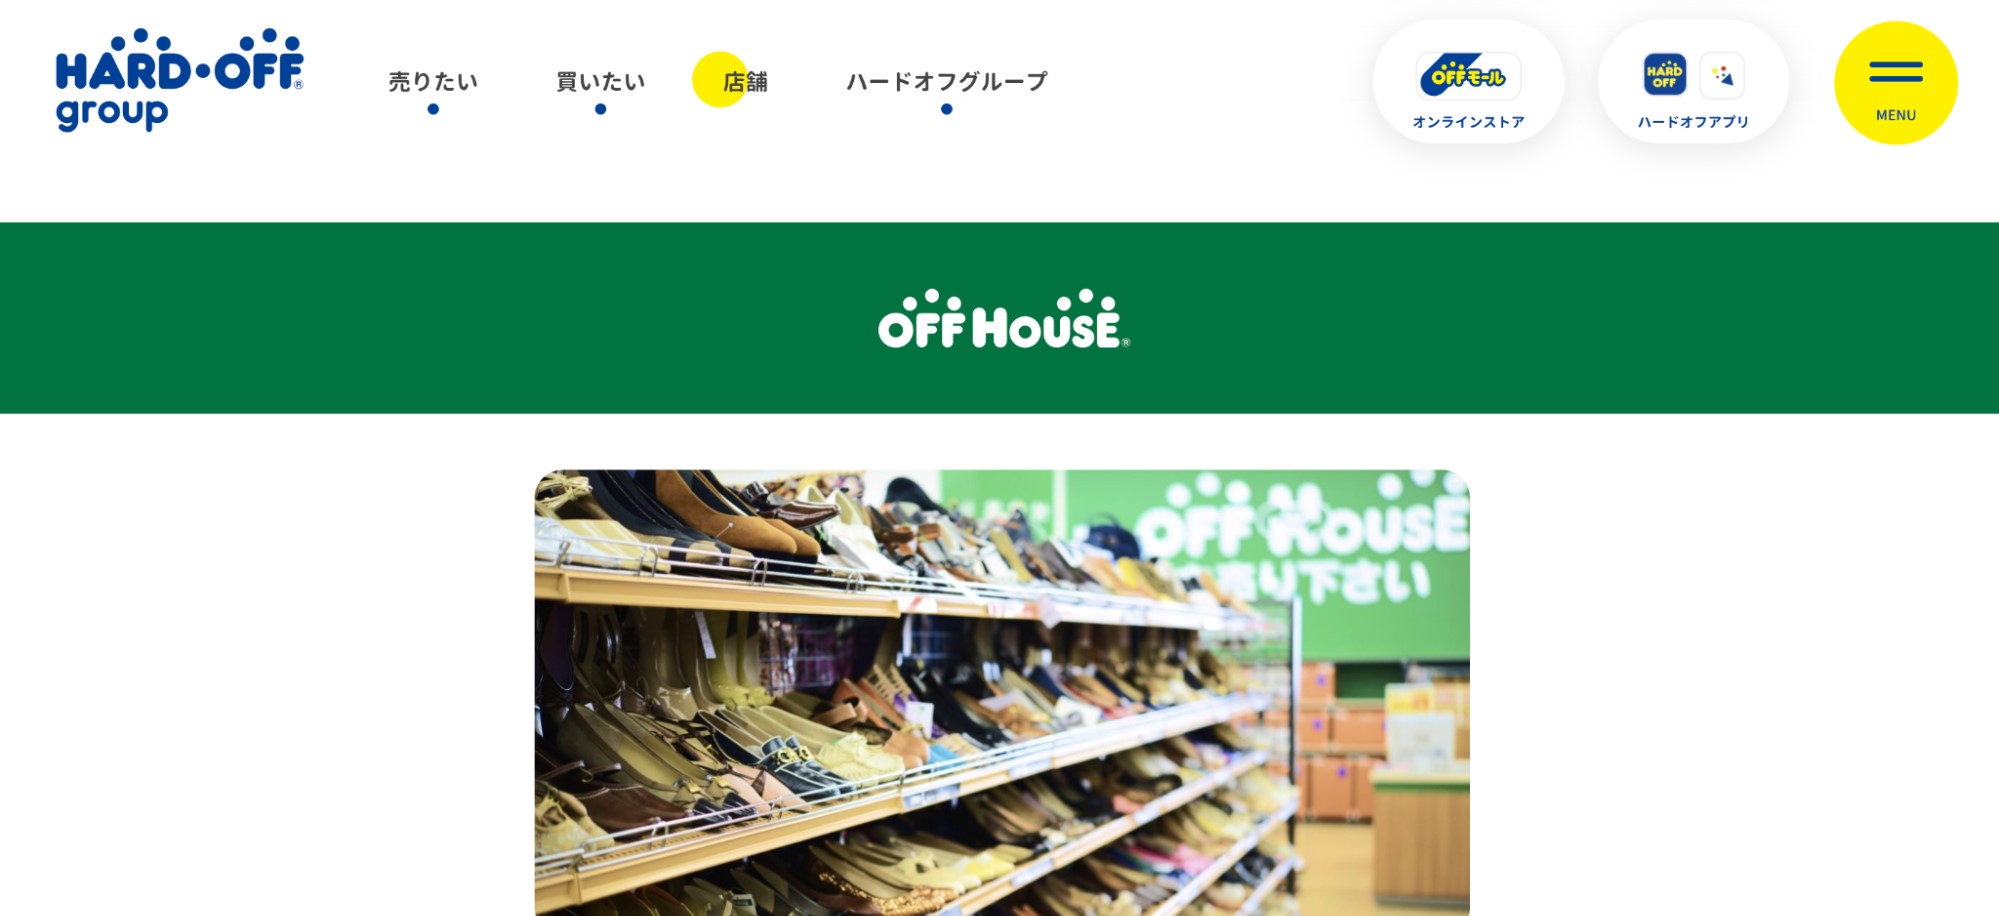 OFF HOUSE（オフハウス